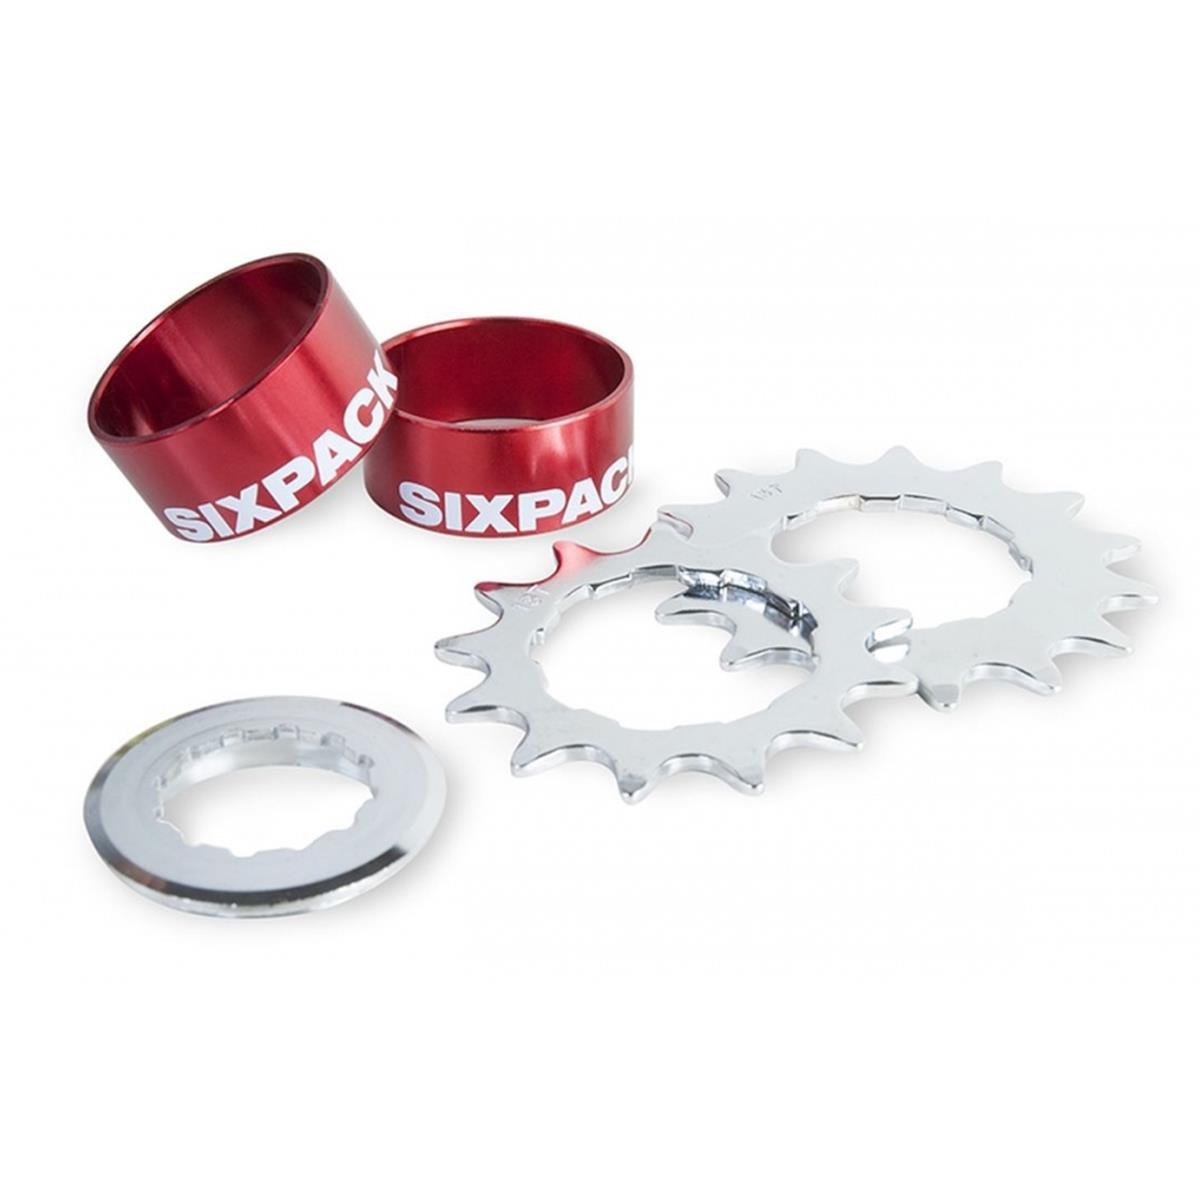 Sixpack Singlespeed Conversion Kit  Red, incl. 2 Chainrings (13 & 15T), fits 8/9710-speed Shimano/Sram Freewheels